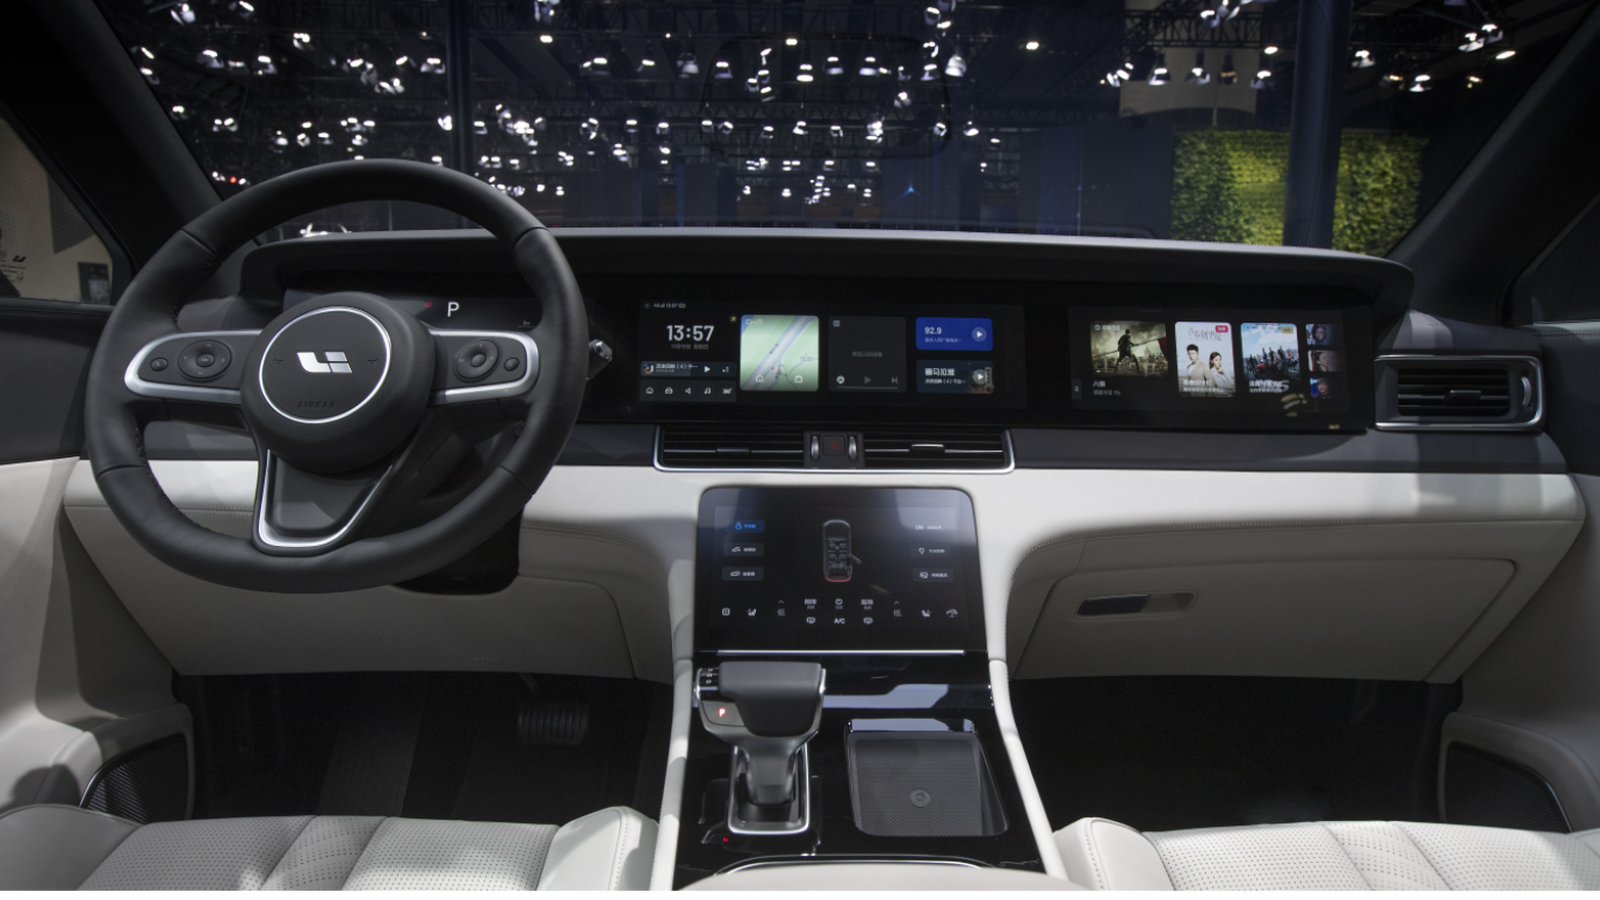 10 essential car entertainment system tips that every Lixiang One car owner should know!